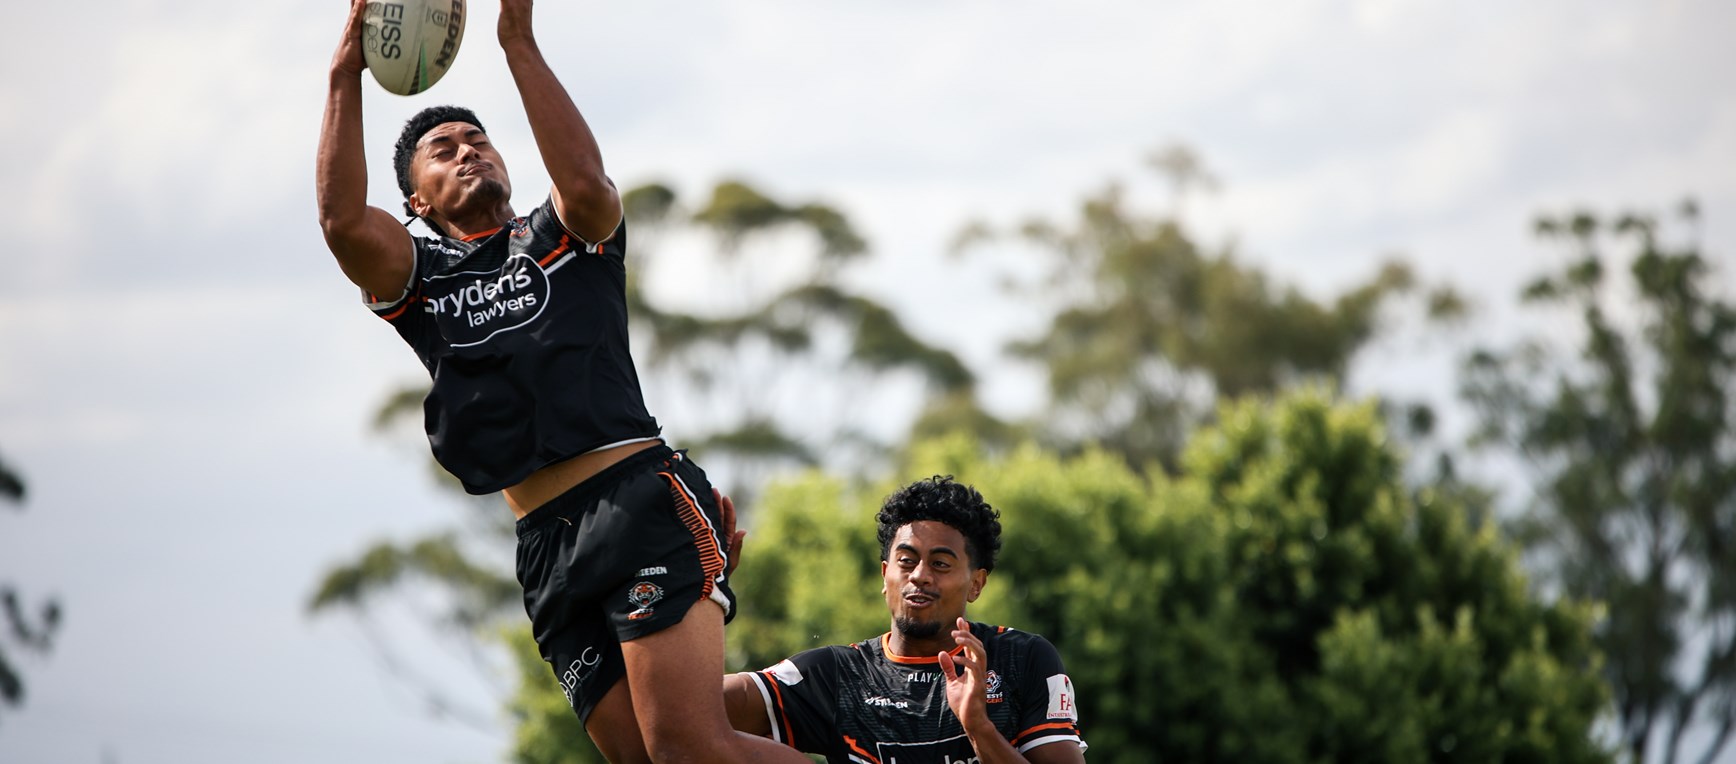 Gallery: Training at Campbelltown